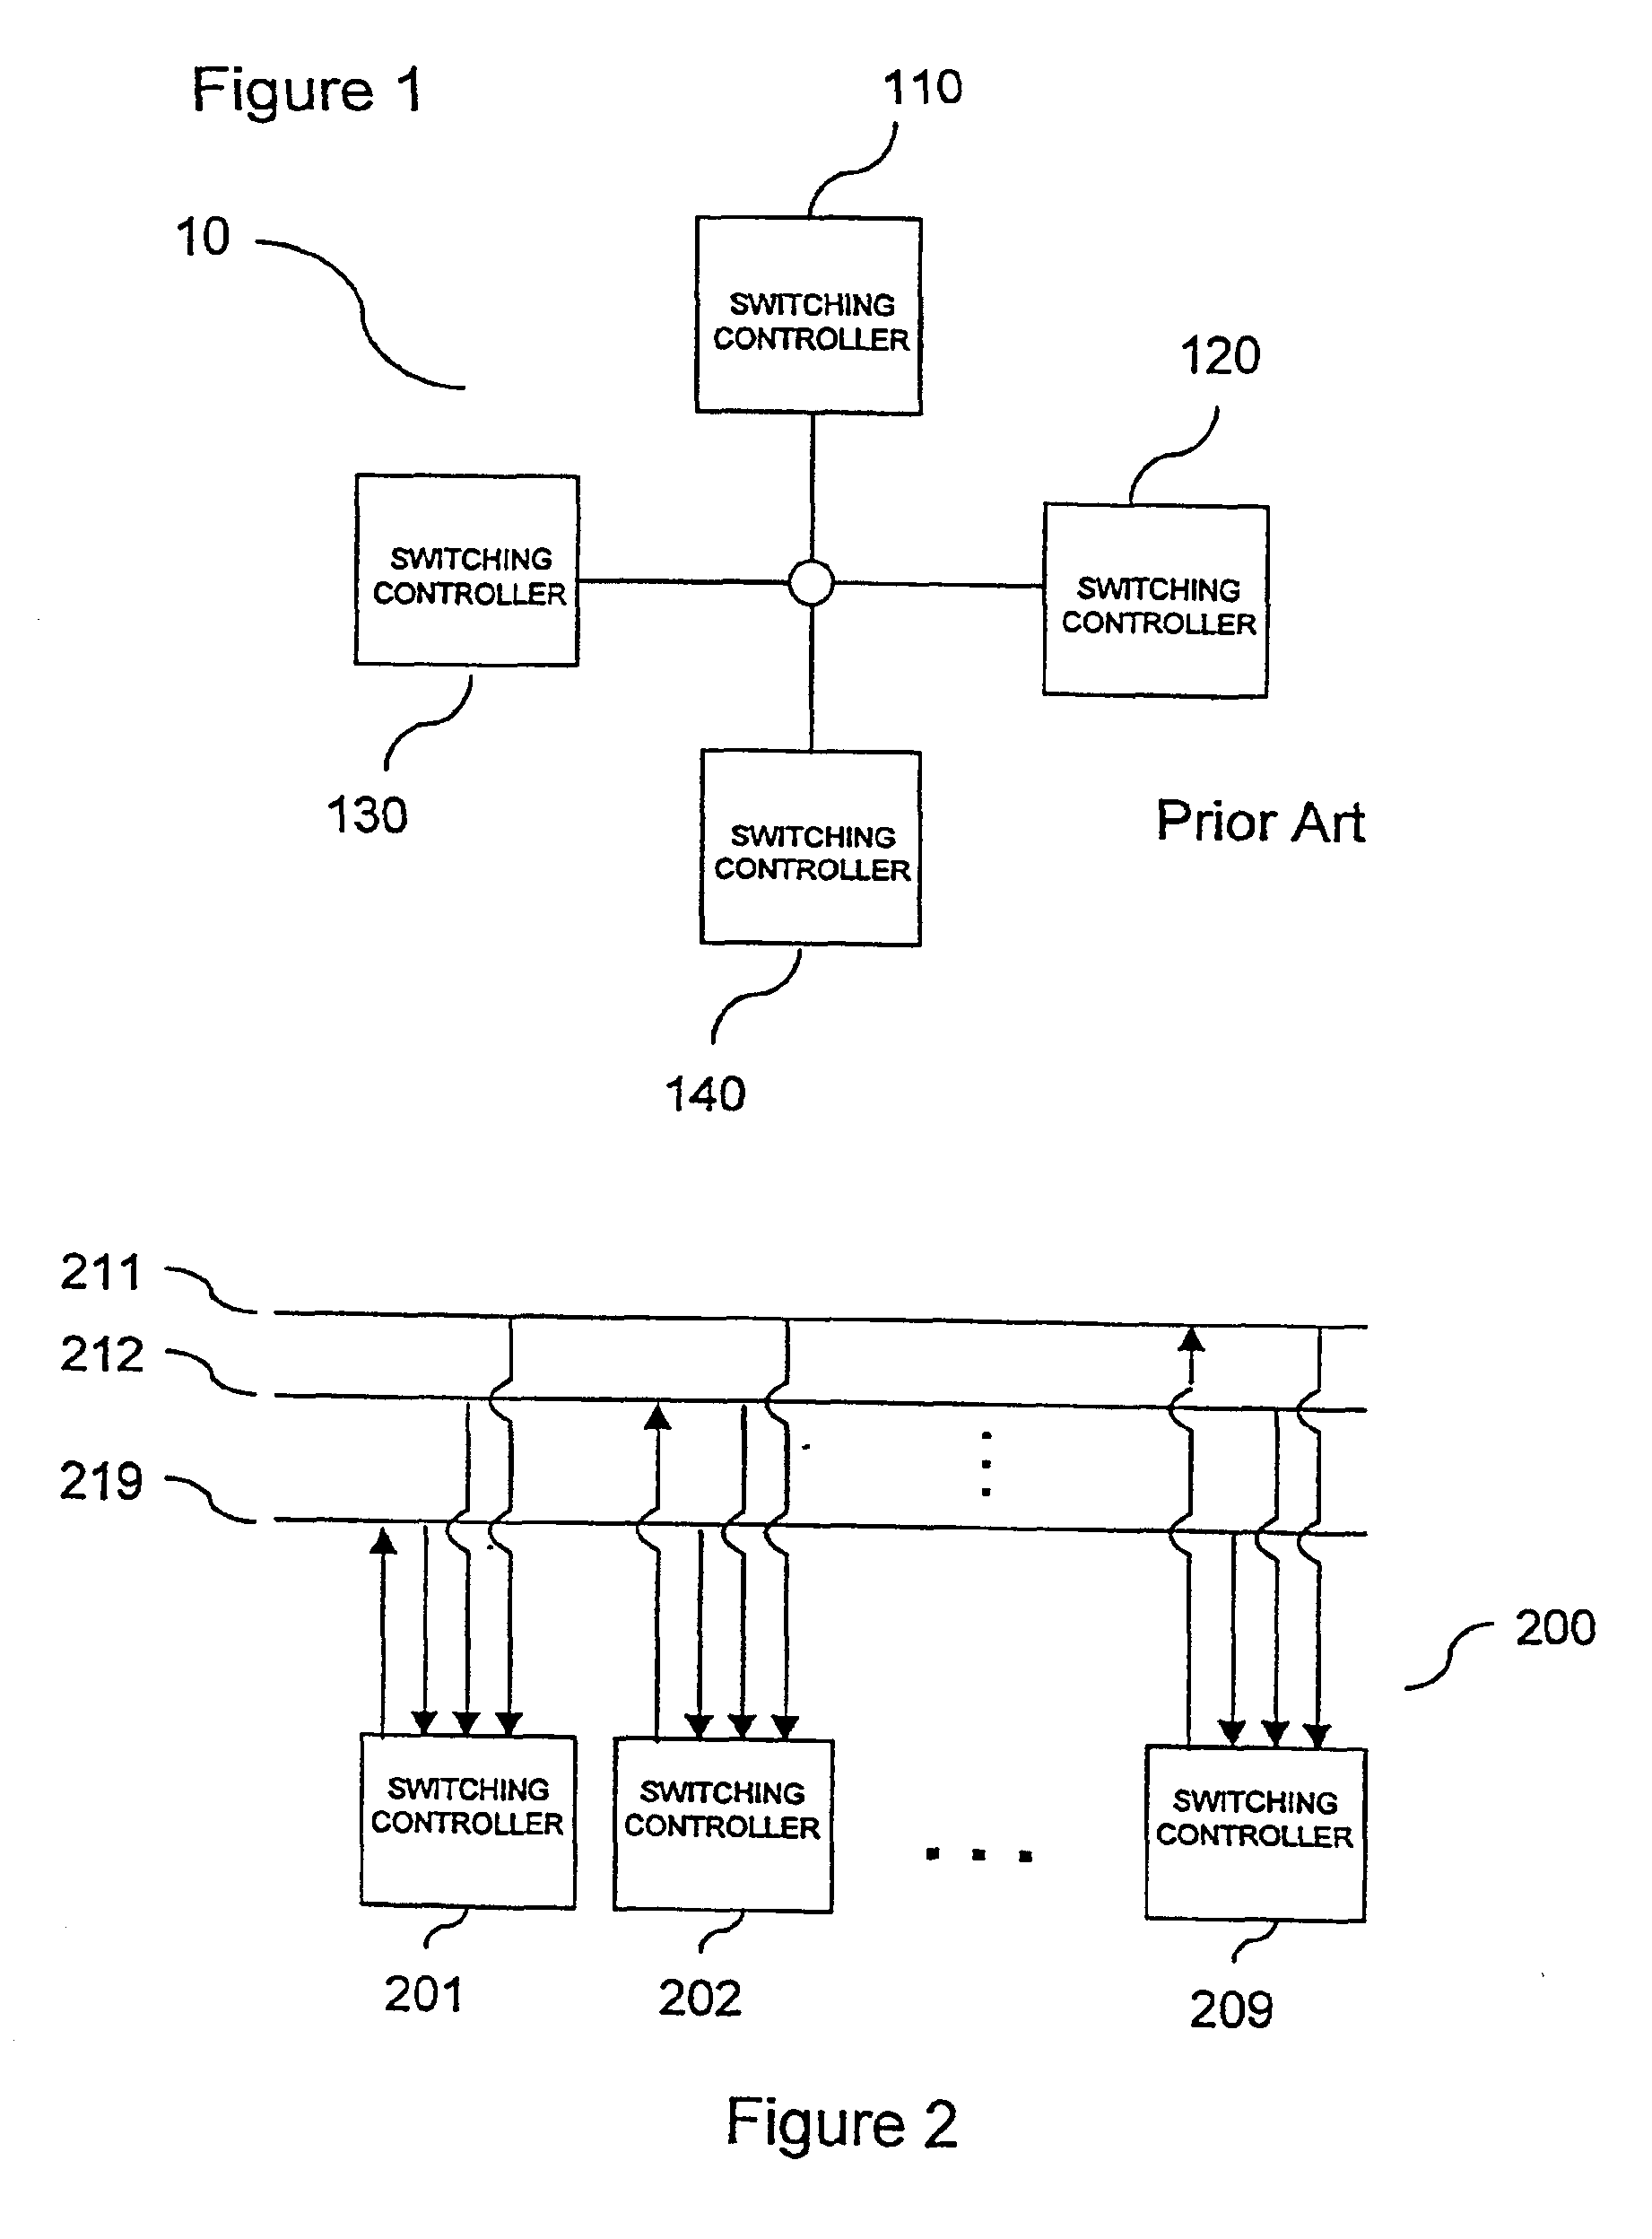 Receive processing for dedicated bandwidth data communication switch backplane